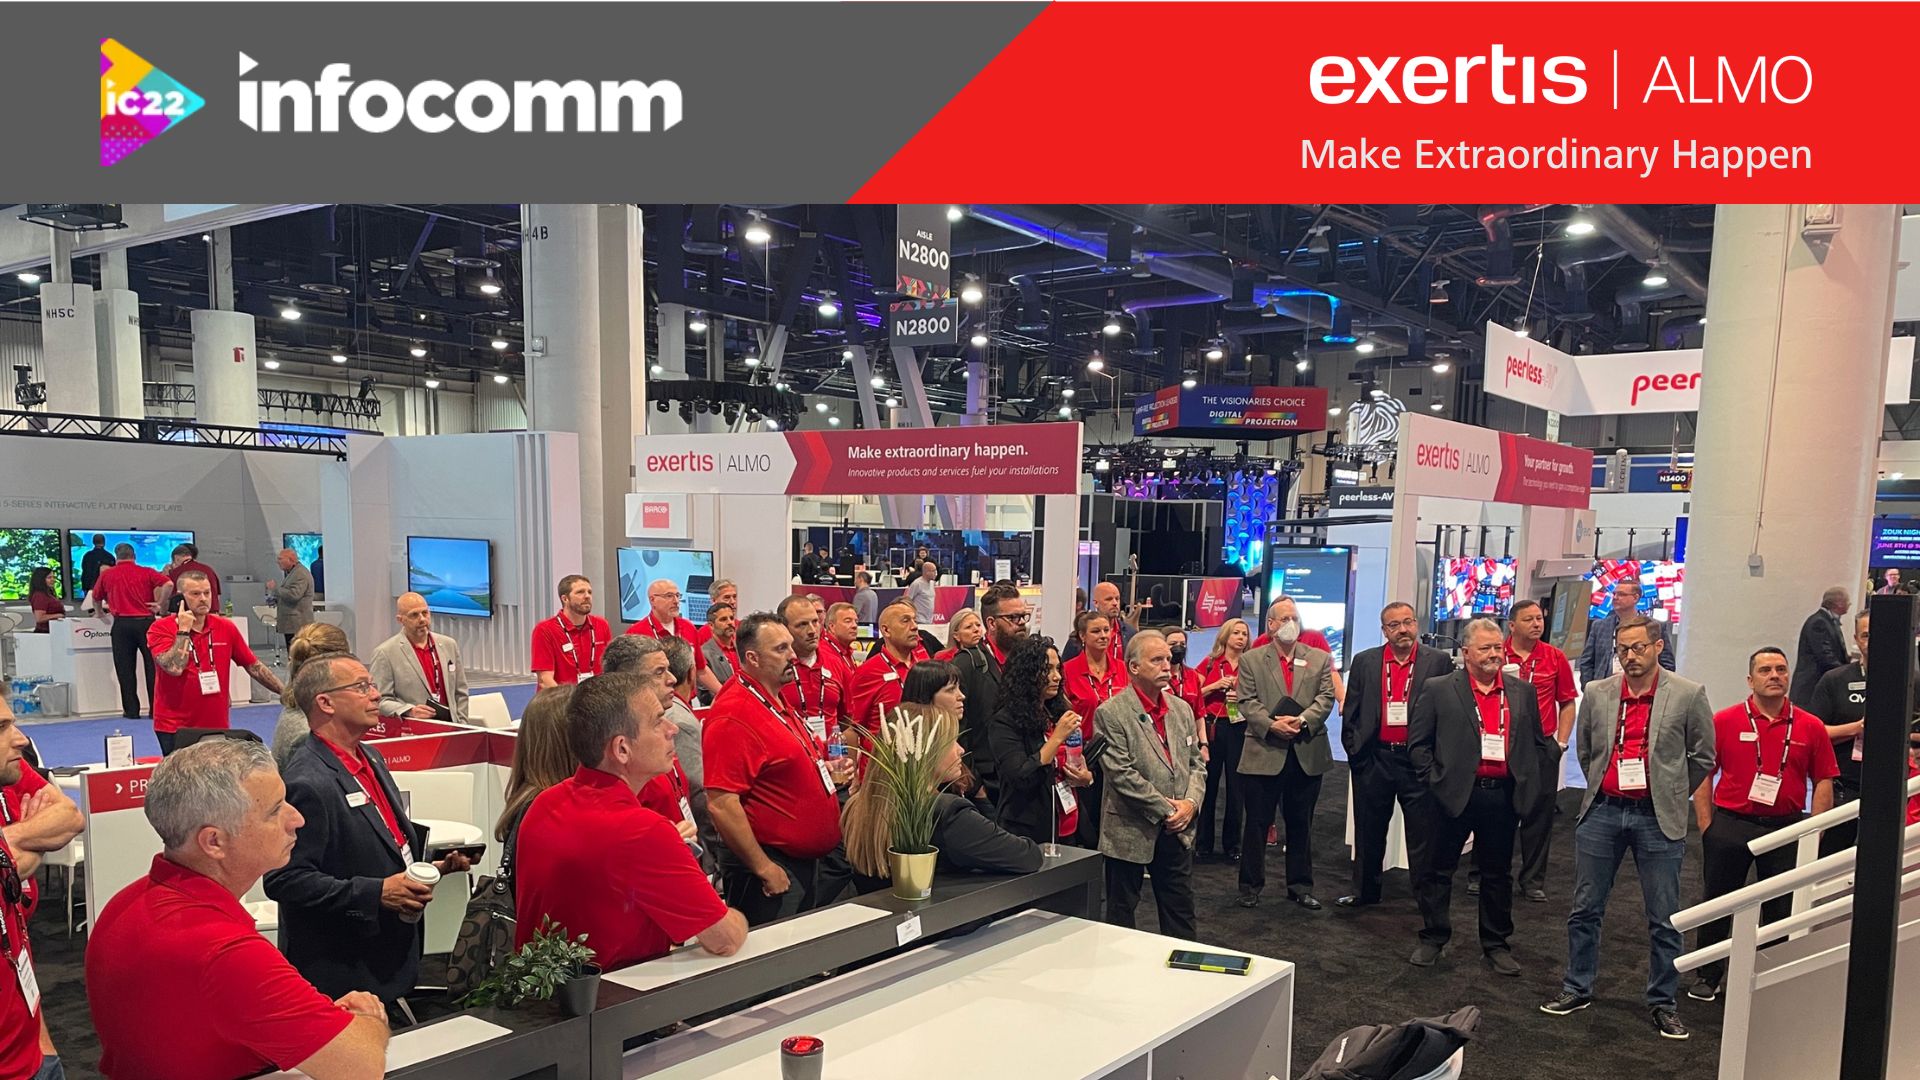 Exertis Almo booth at InfoComm 2022